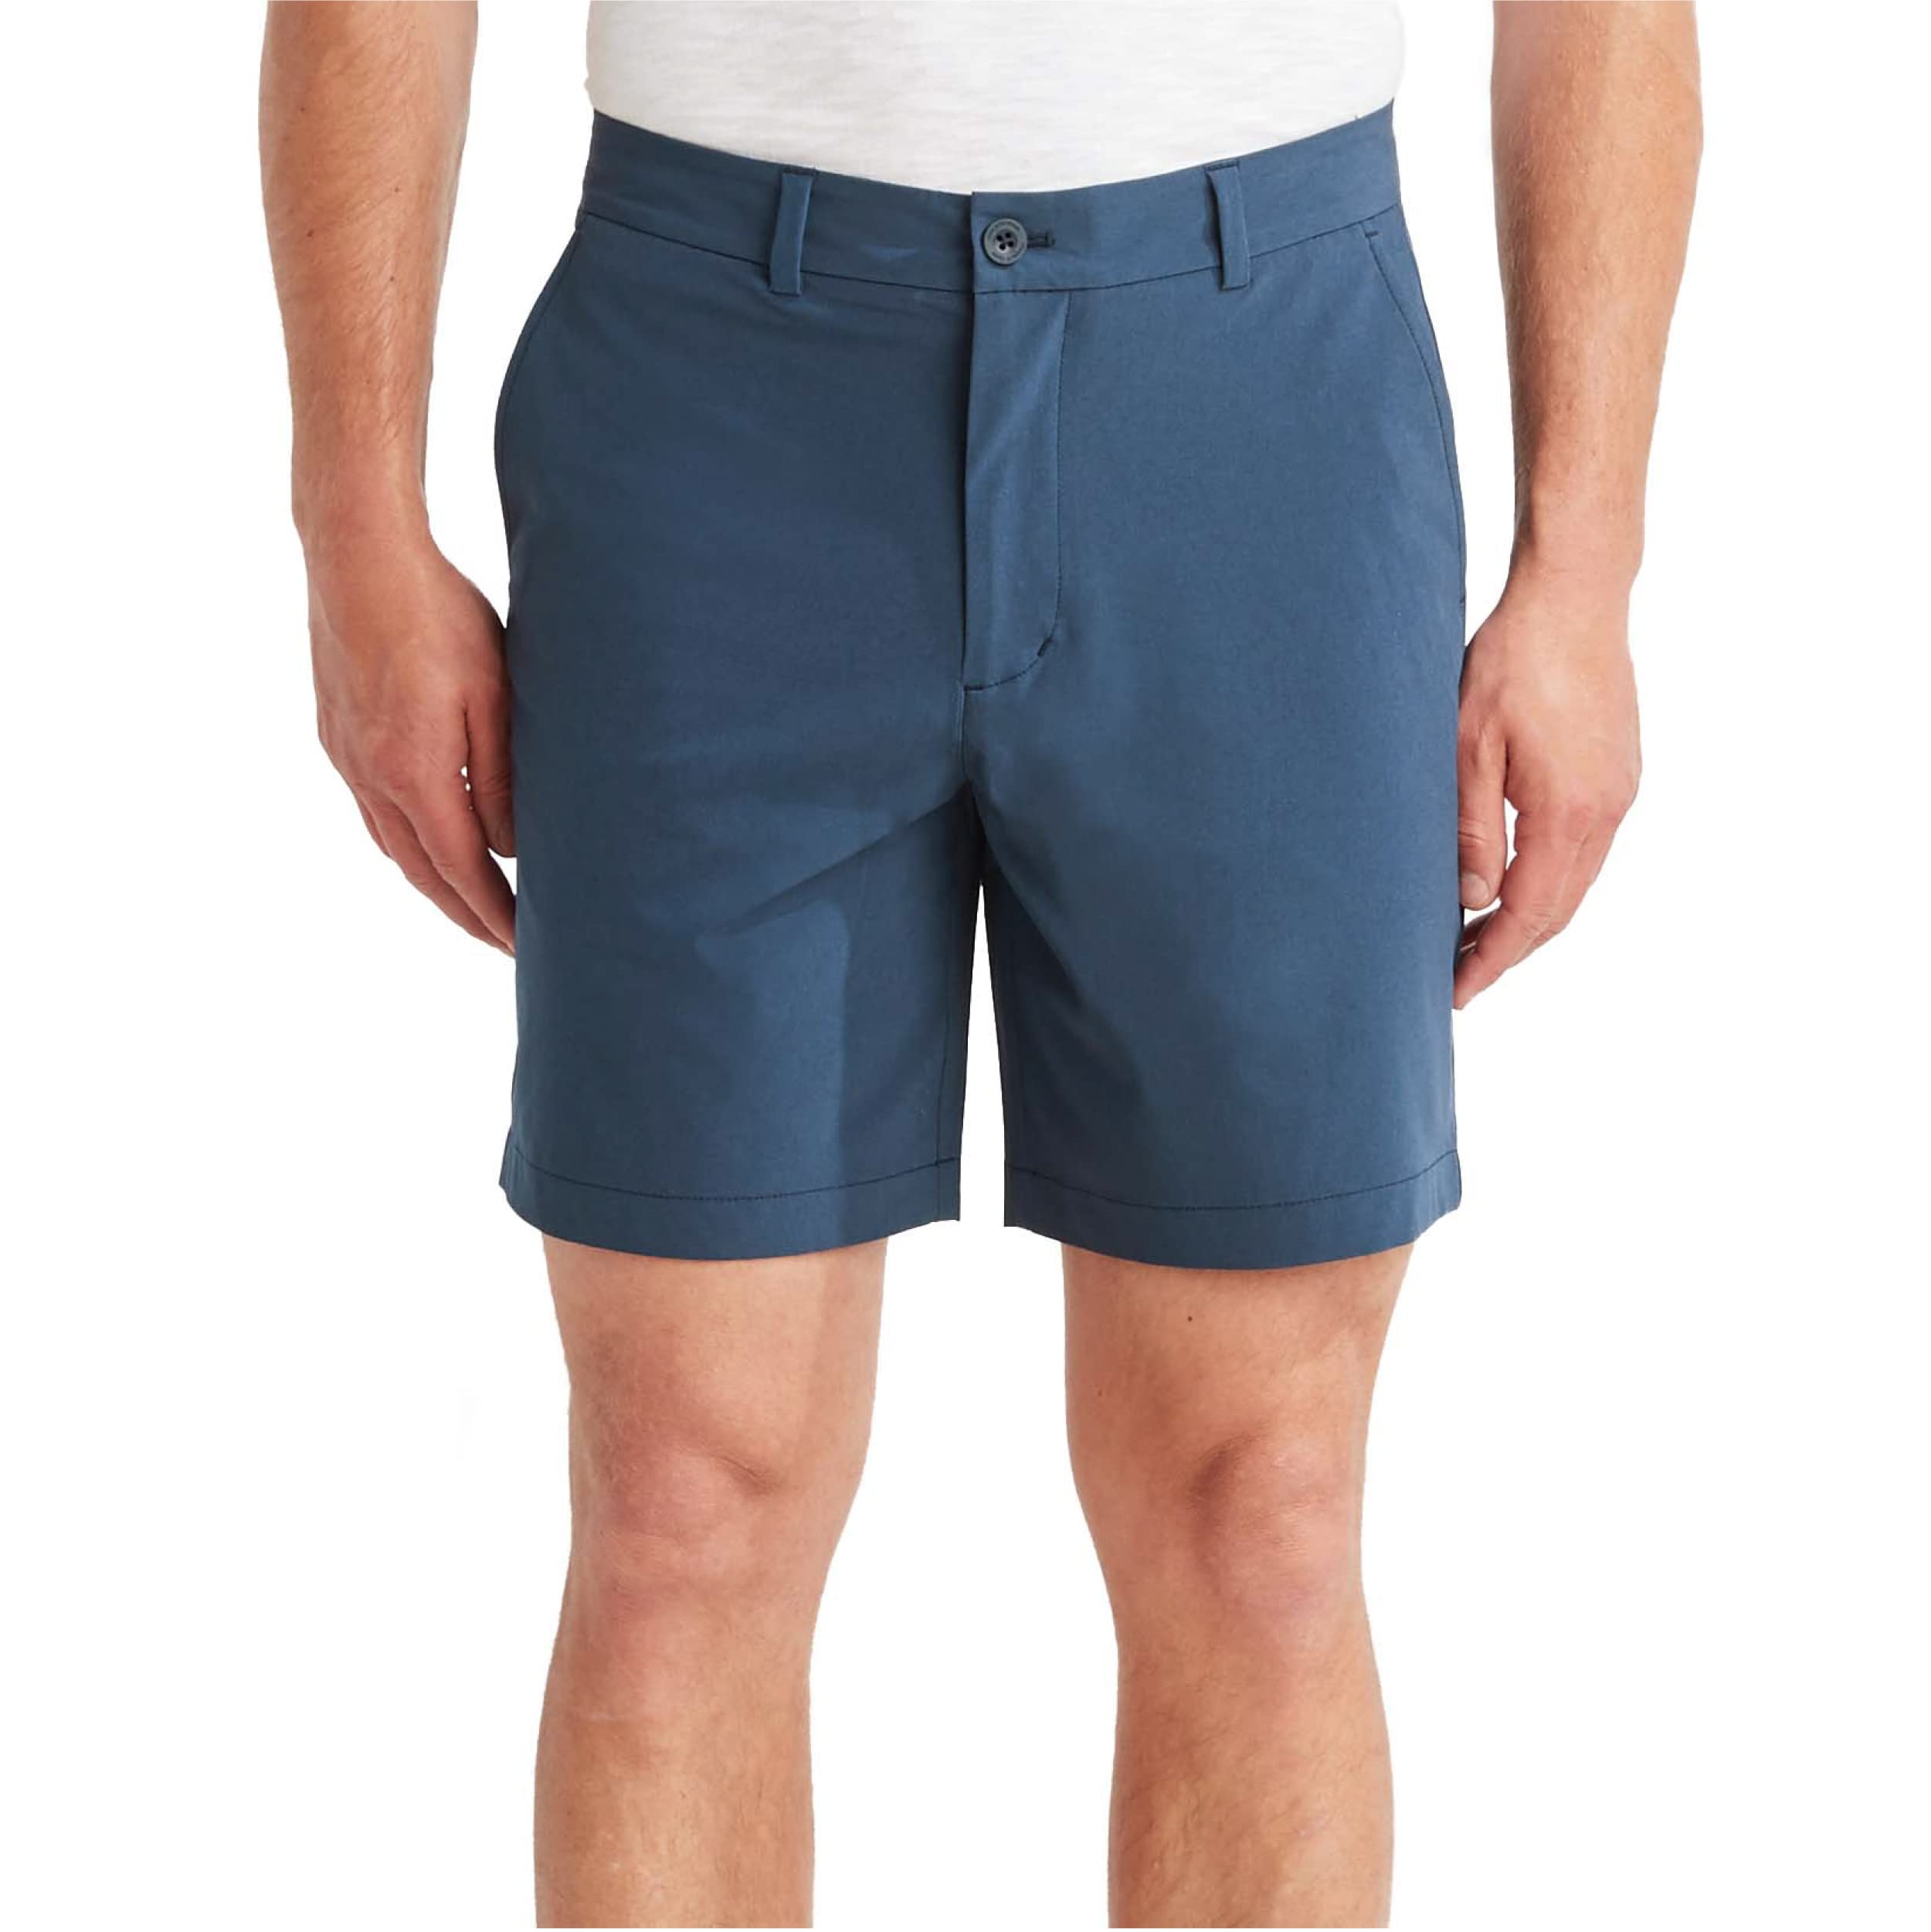 Vineyard vines shorts, when it comes to styling Vineyard Vines shorts, there are endless possibilities to create versatile and fashionable